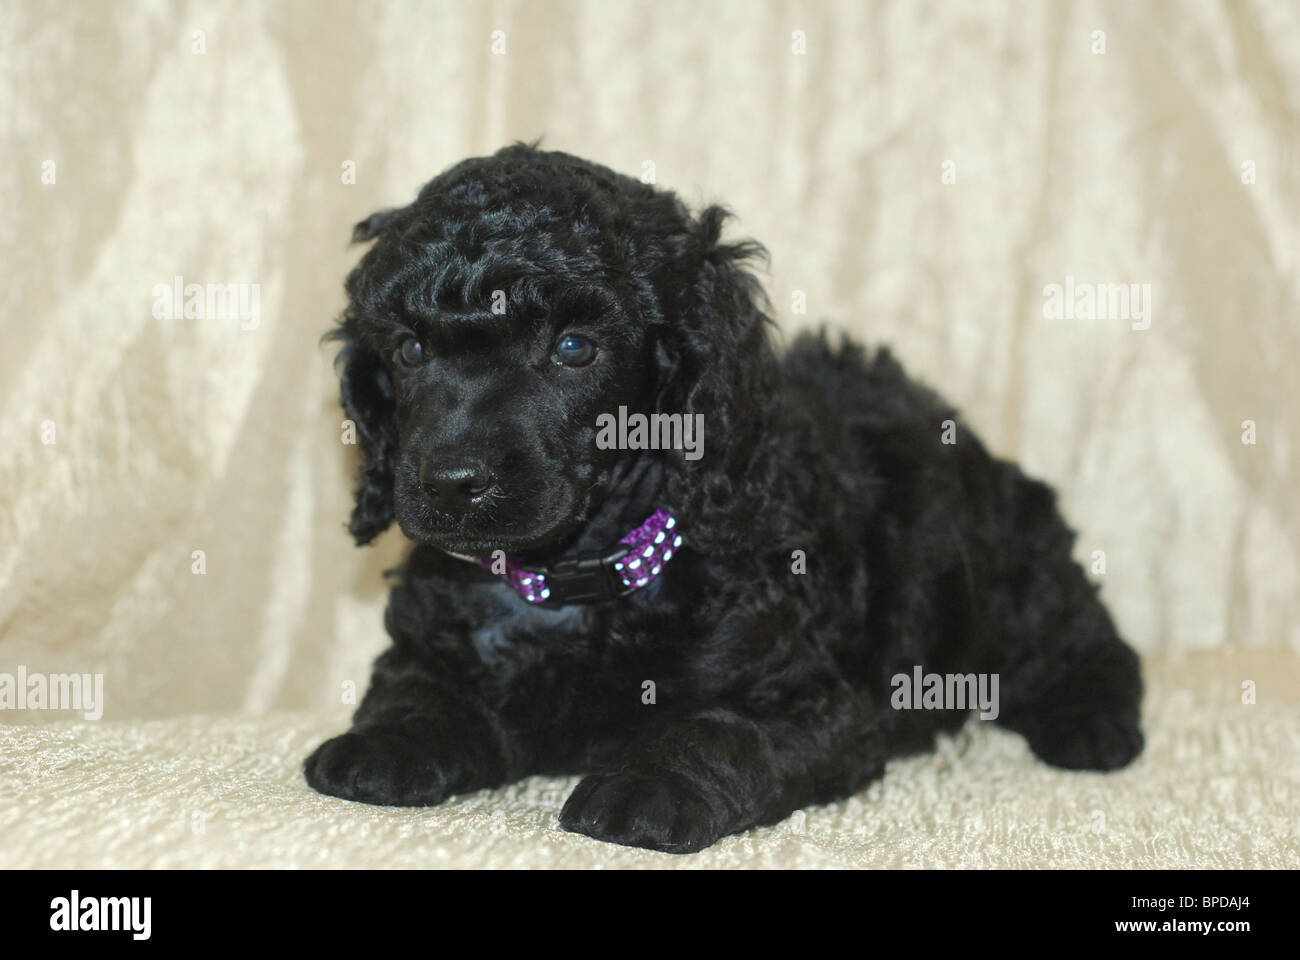 A one month old black miniature poodle puppies facing camera. Stock Photo